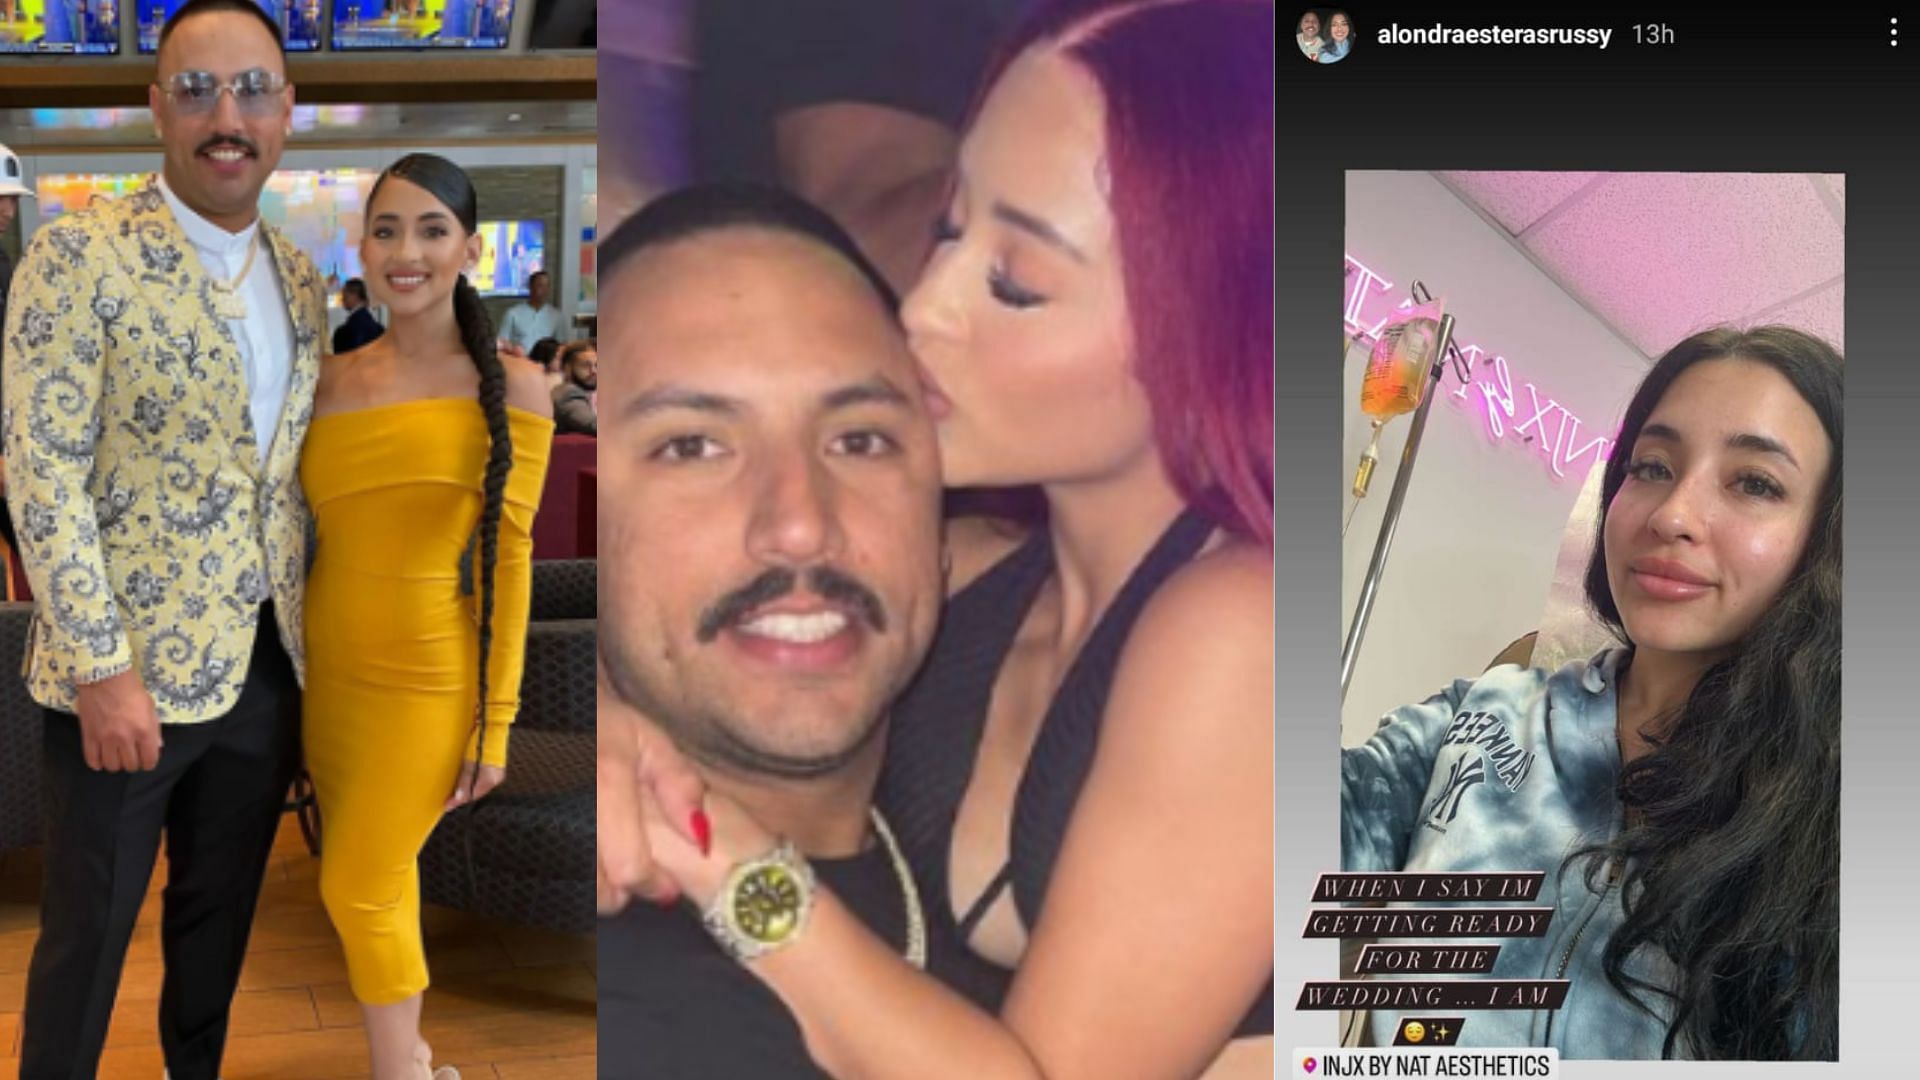 New York Yankees pitcher Nestor Cortes and fiance Alondra Esteras Russy  share an intimate moment with Instagram fans